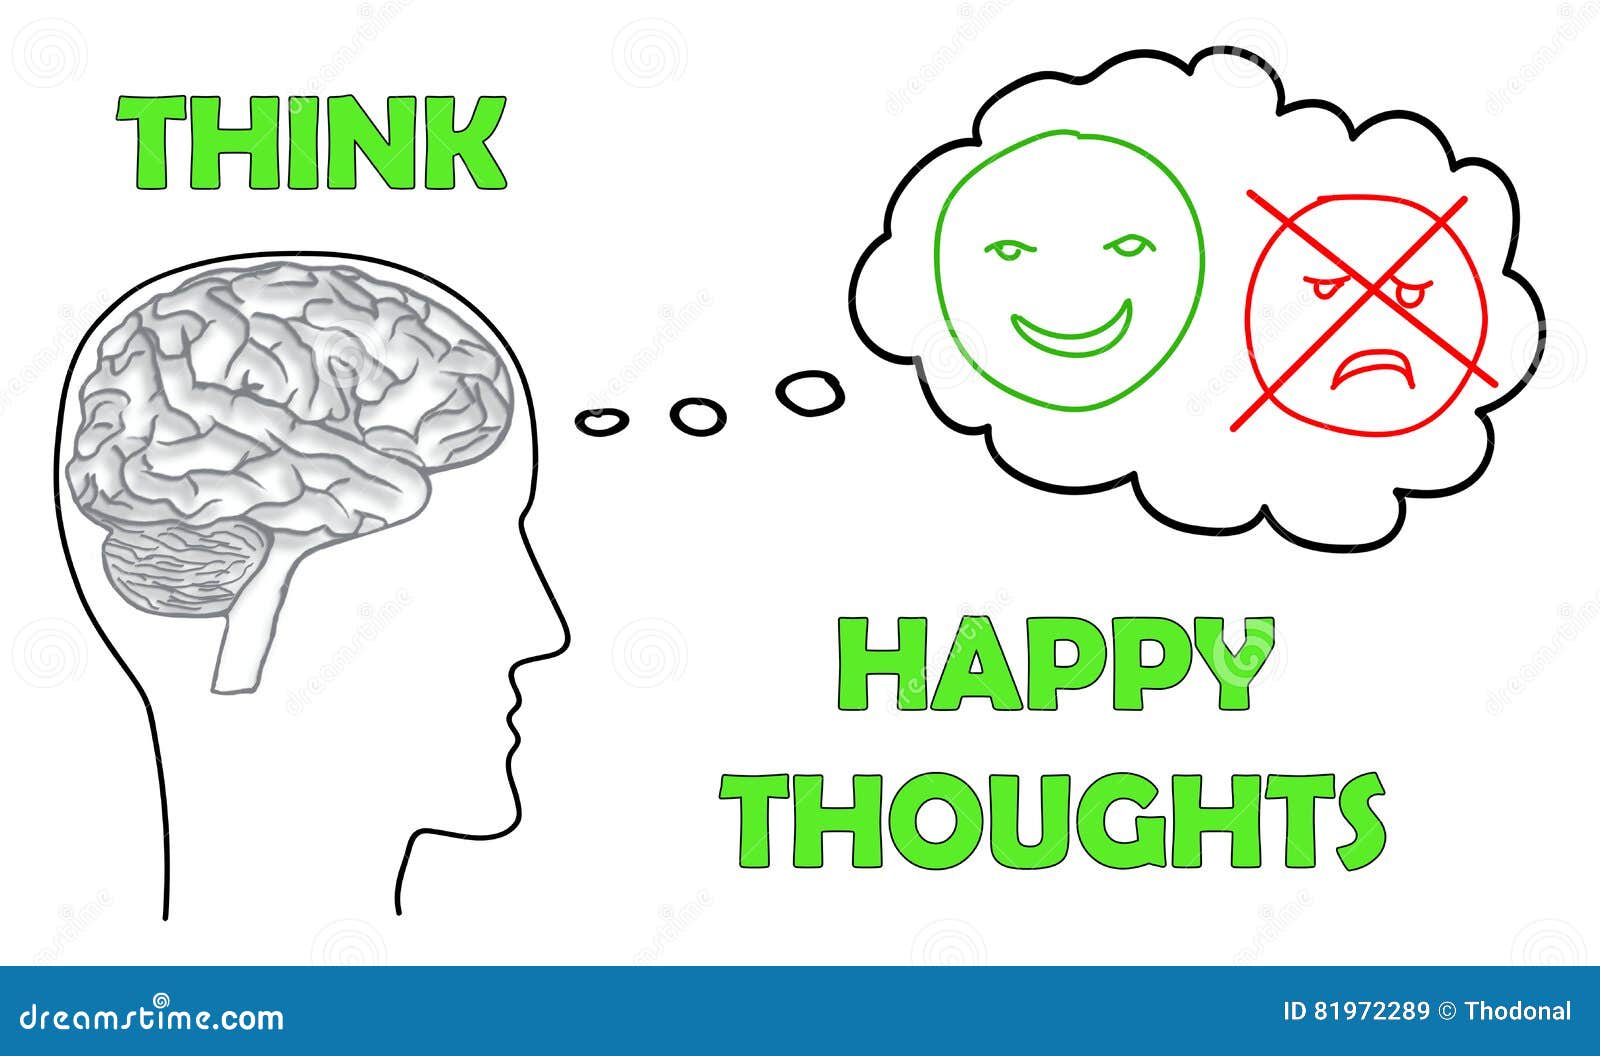 Happy Thoughts Concept on White Background Stock Illustration ...